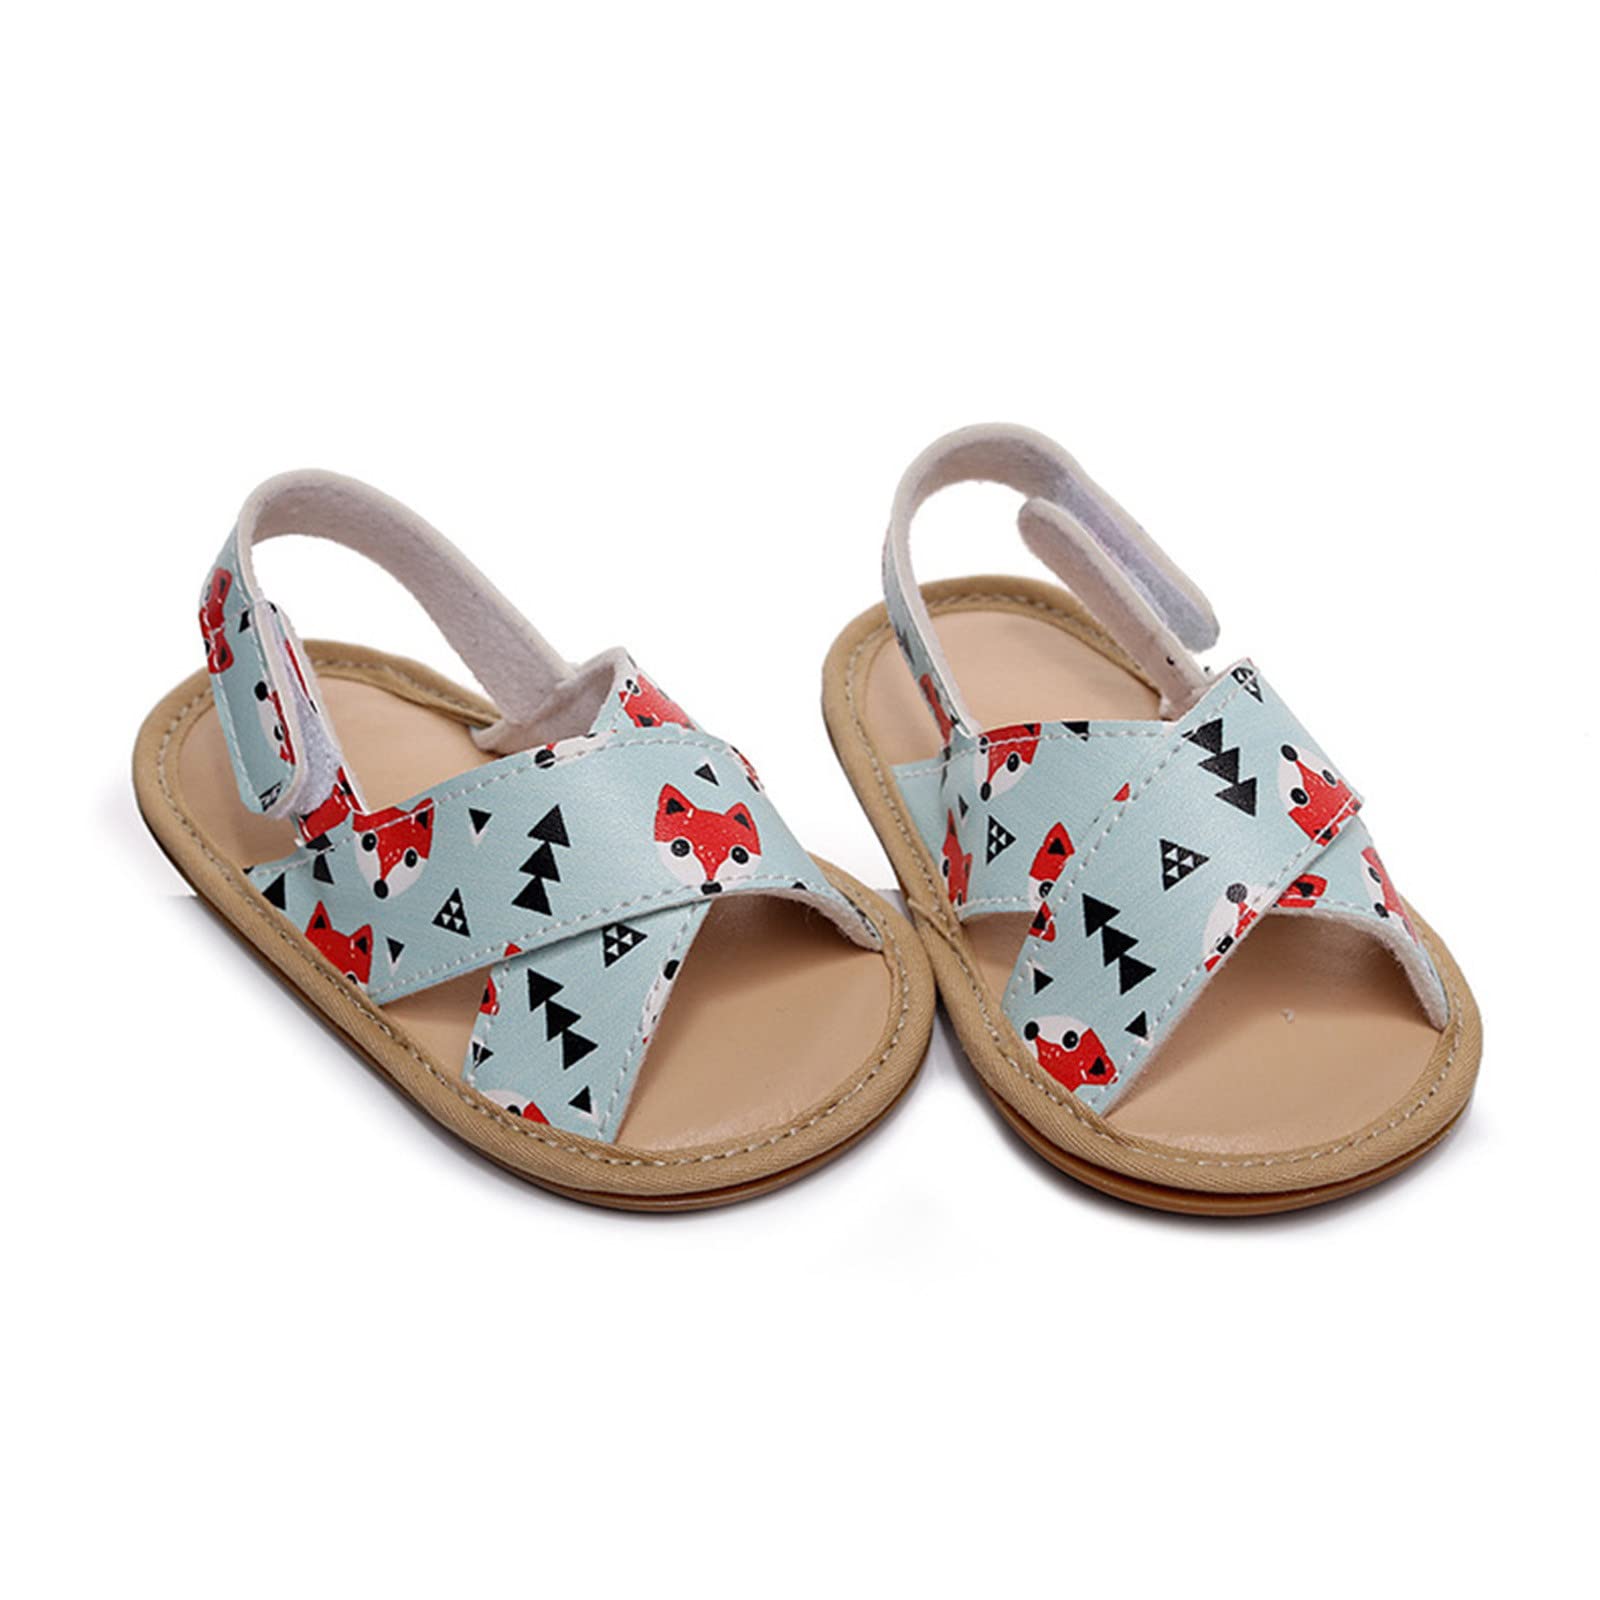 TODOZO Infant Boys Girls Open Toe Cartoon Printed Shoes First Walkers Shoes Summer Toddler Flat Sandals Mesh Play Sandals